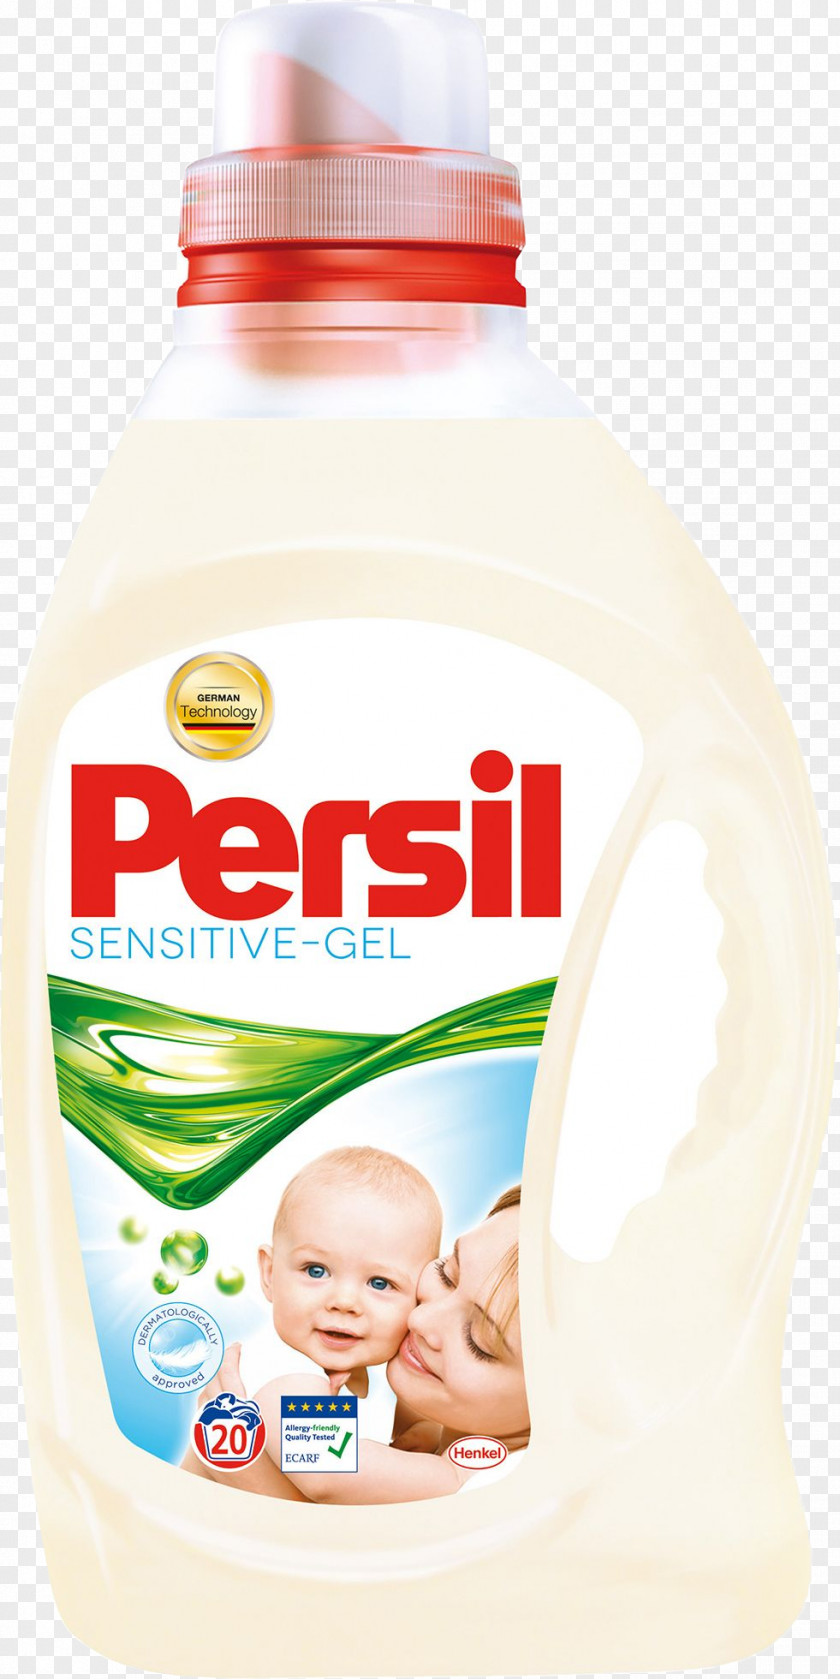 Soap Laundry Detergent Persil Washing PNG